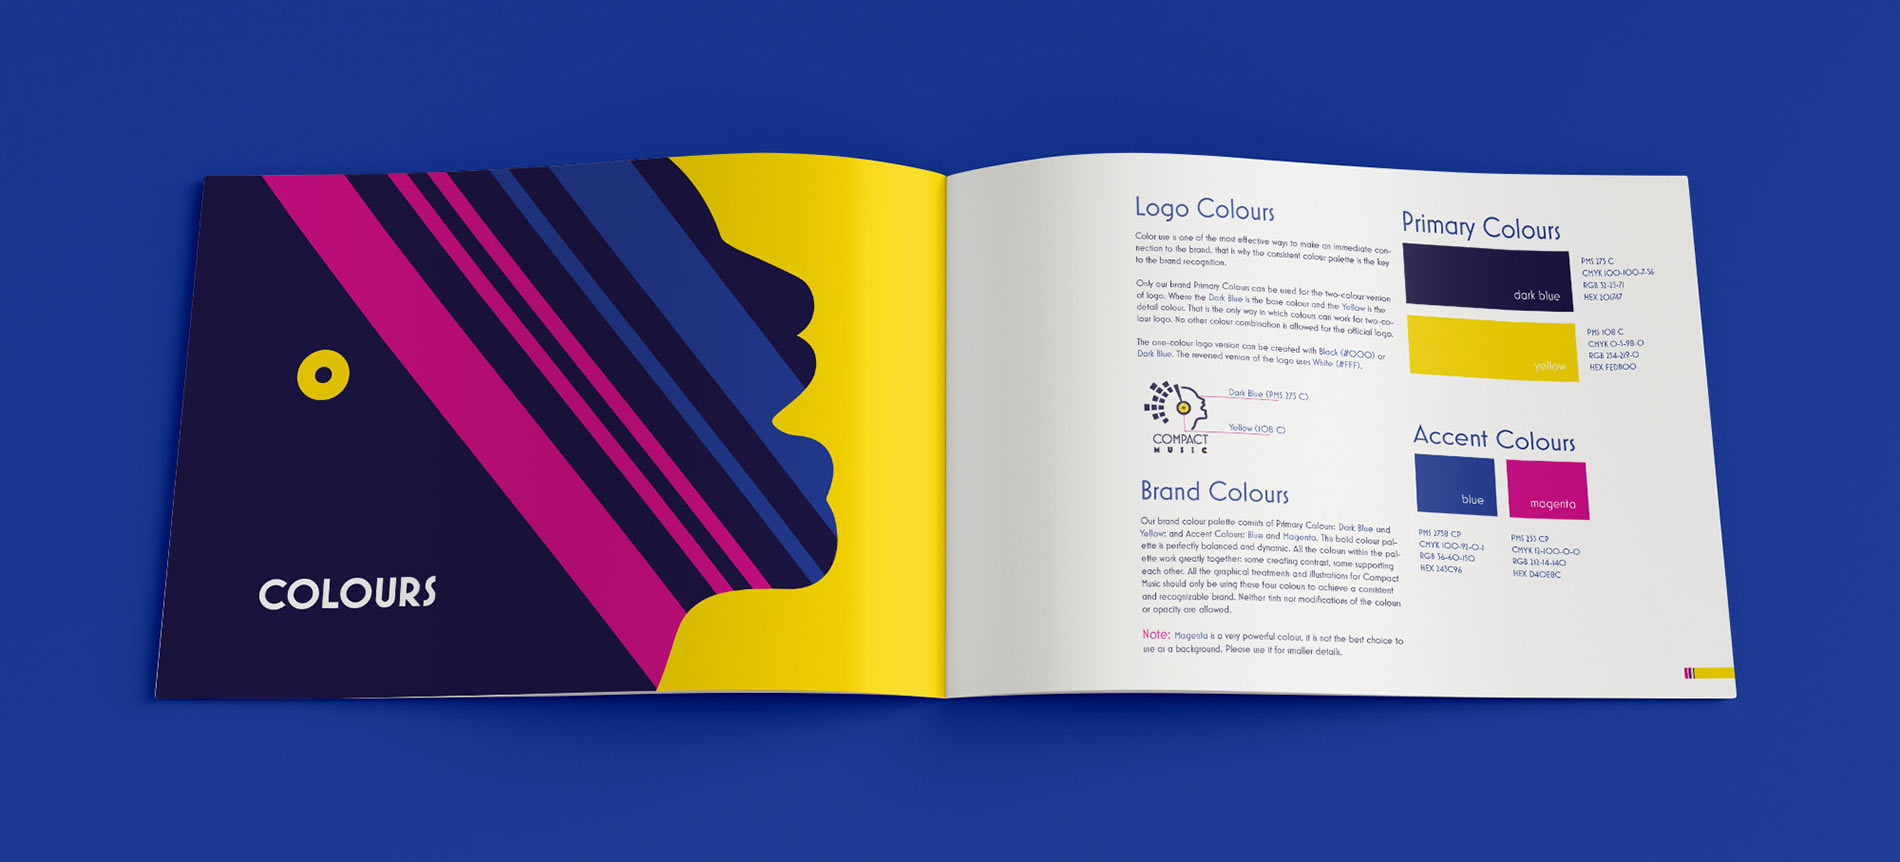 An image of a spread from the brand guidelines for Compact Music store